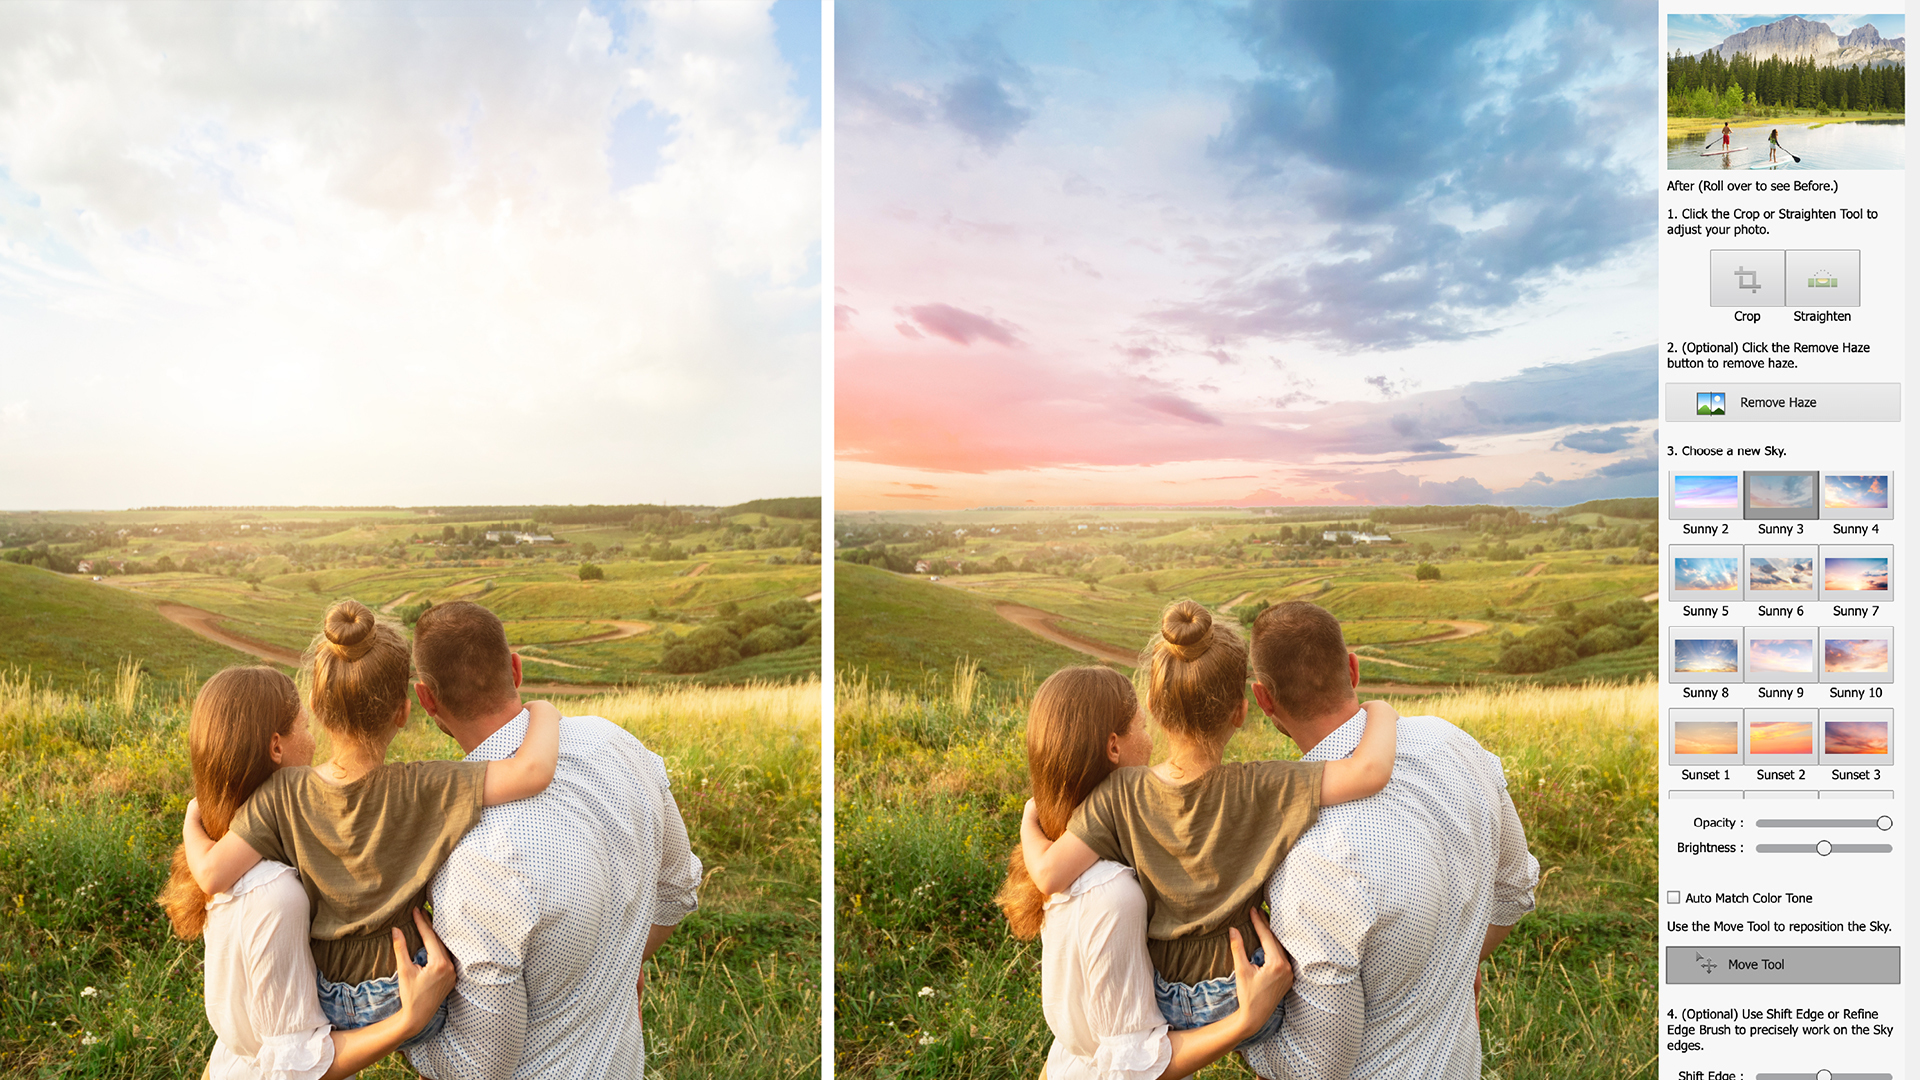 Easily replace skies, remove haze and erase unwanted objects to create epic outdoor scenes.